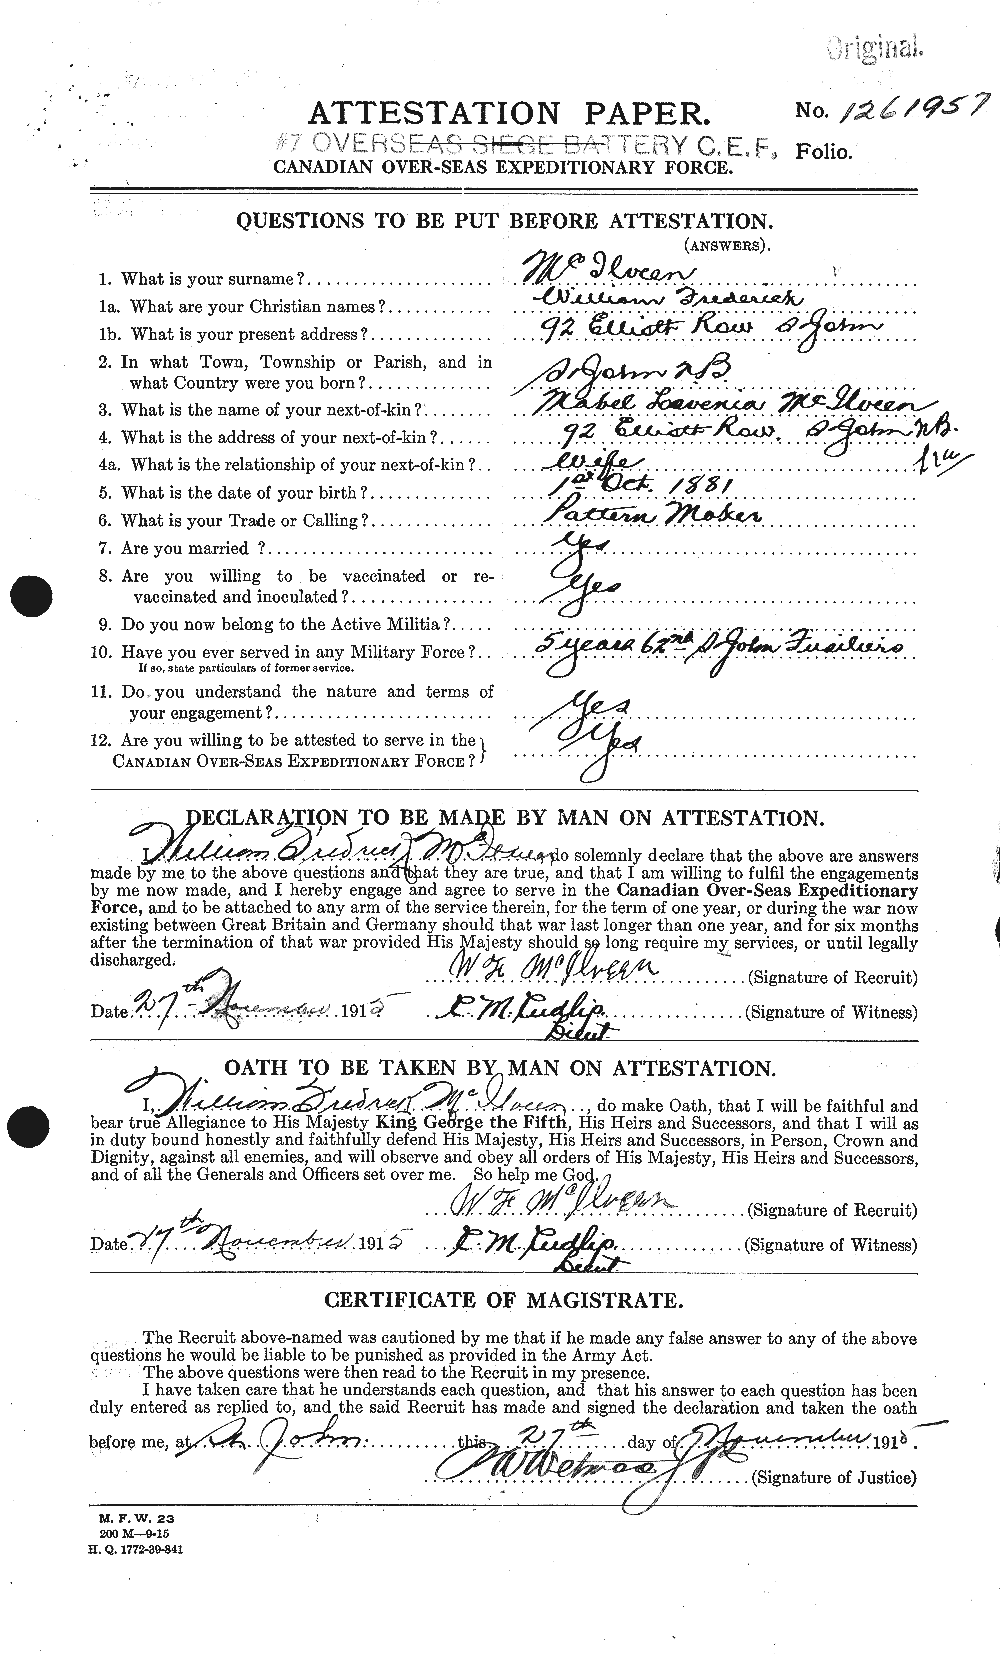 Personnel Records of the First World War - CEF 526466a